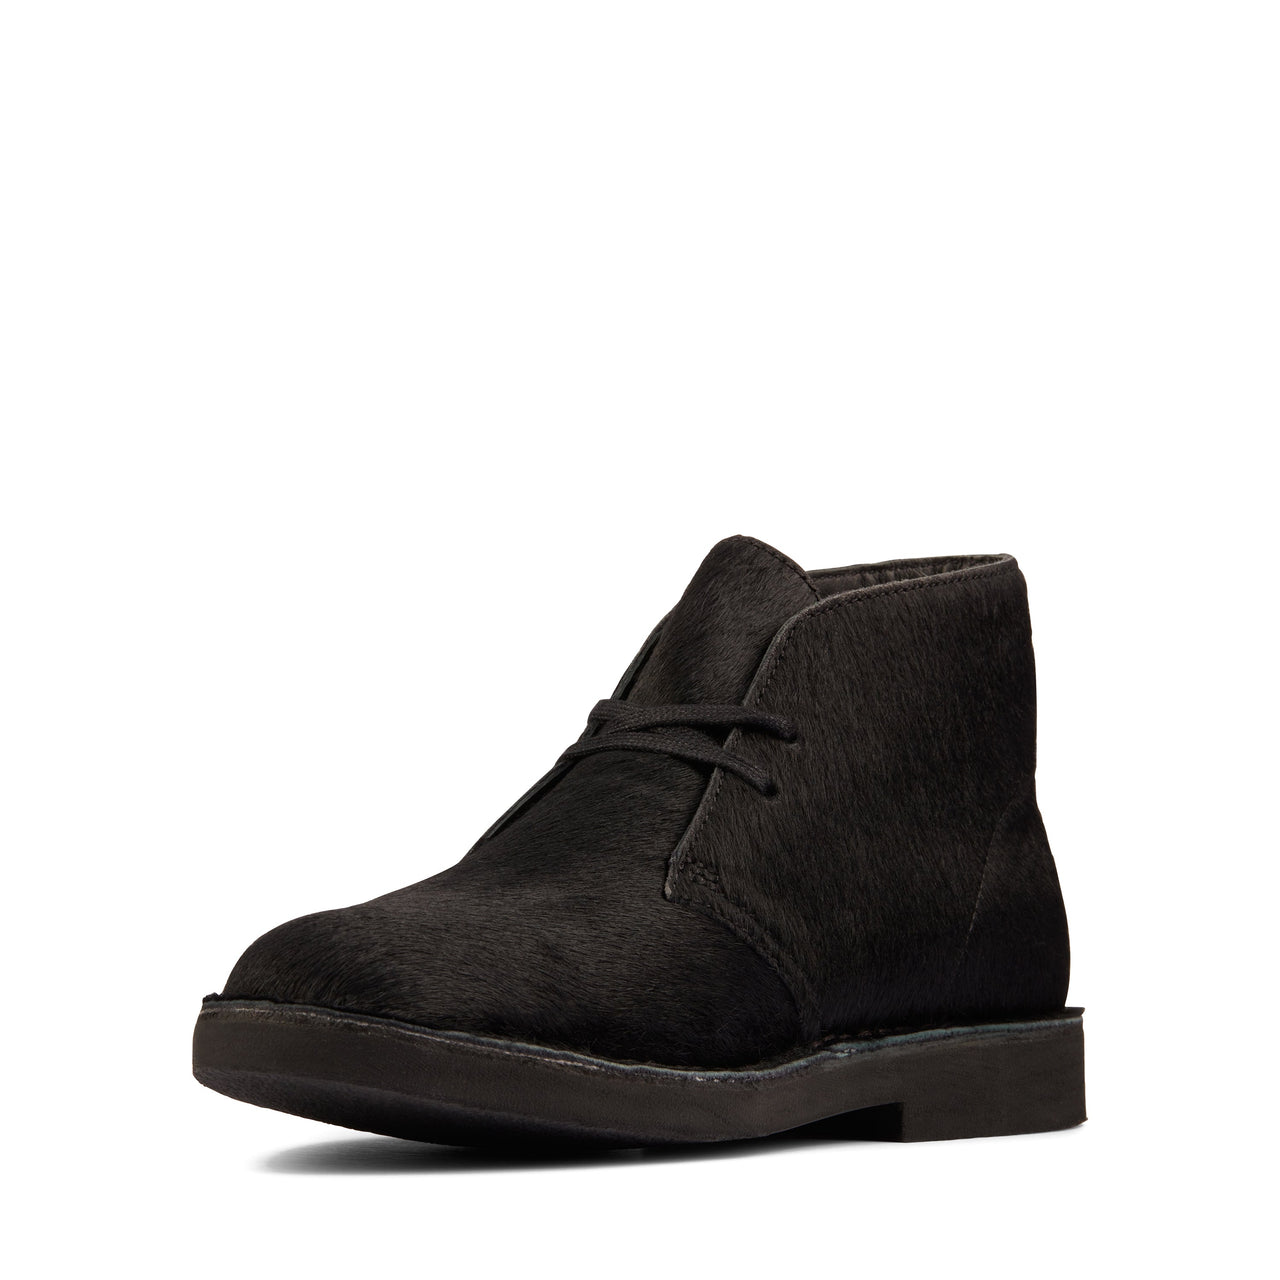 Versatile and timeless Clarks Womens Desert Boot 2 in Black for casual or dressy outfits